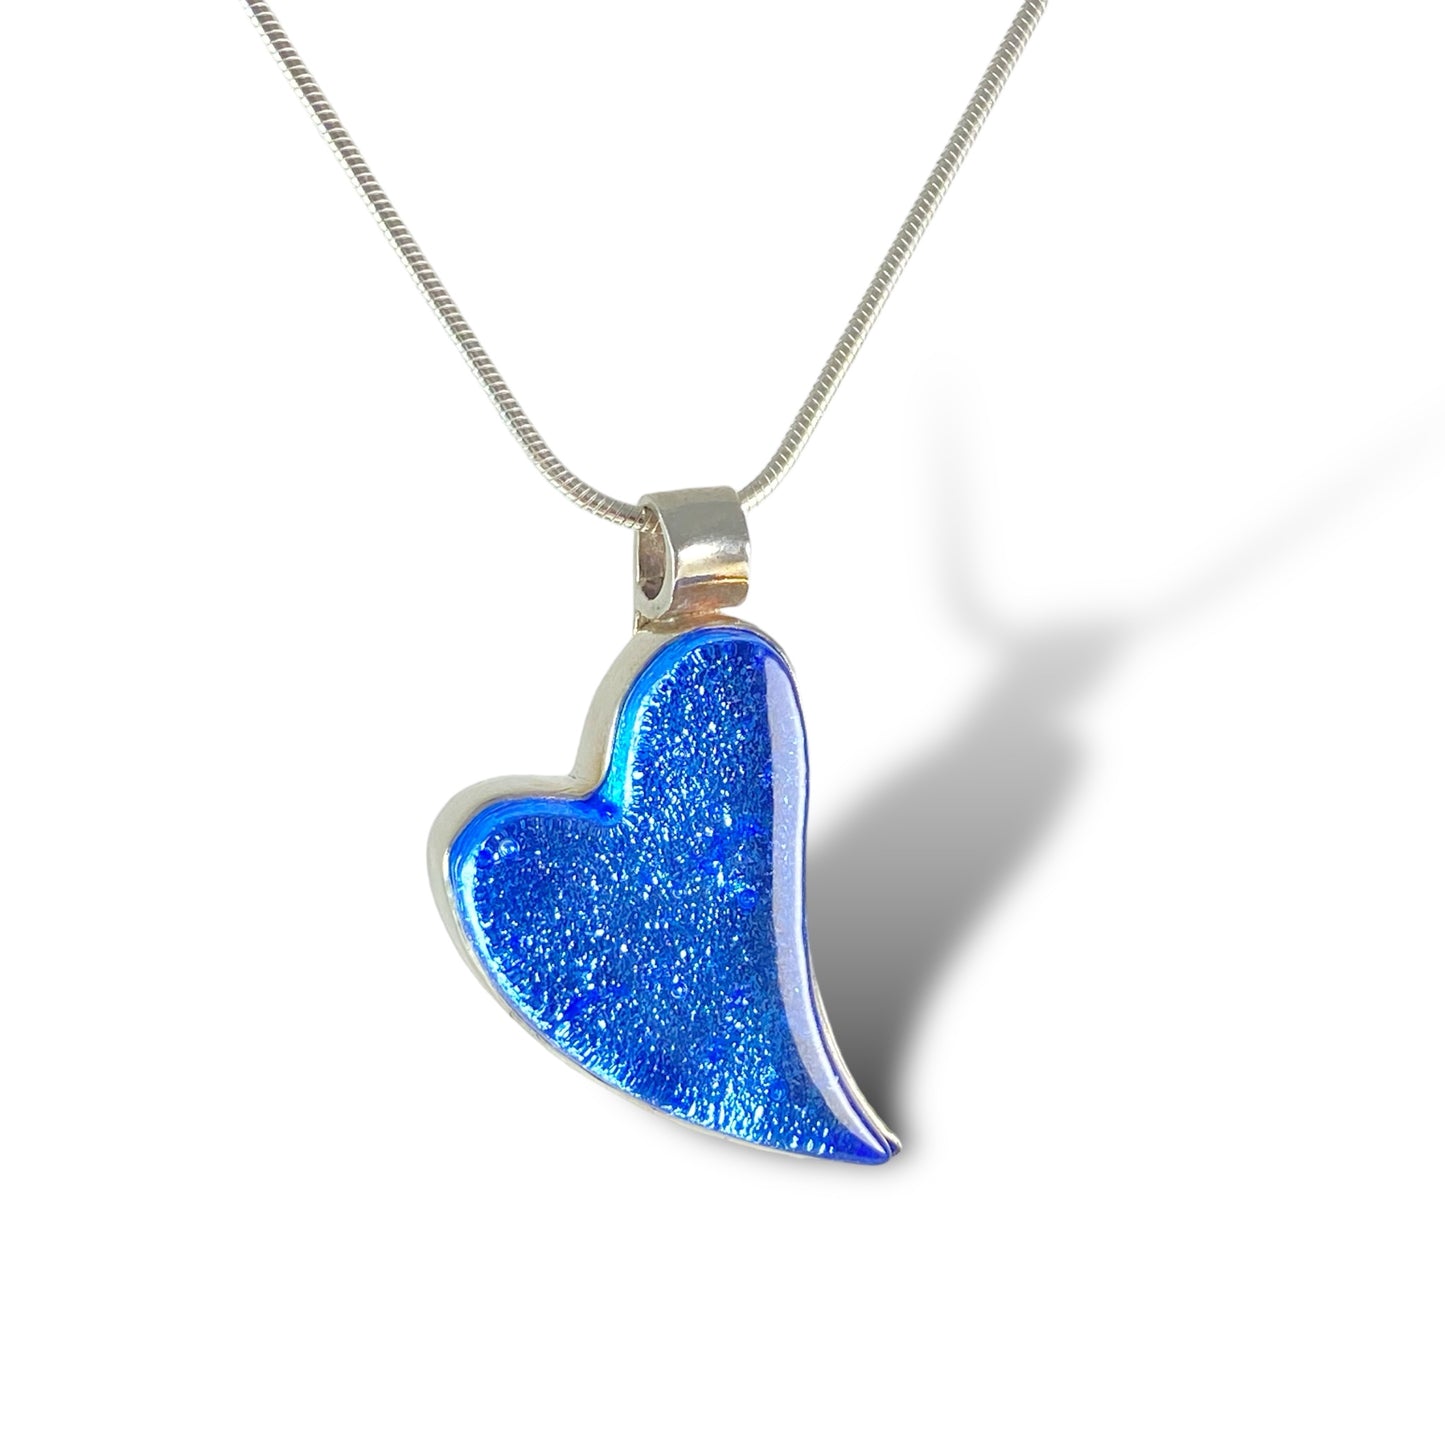 Large Curved Heart Necklace in Sapphire